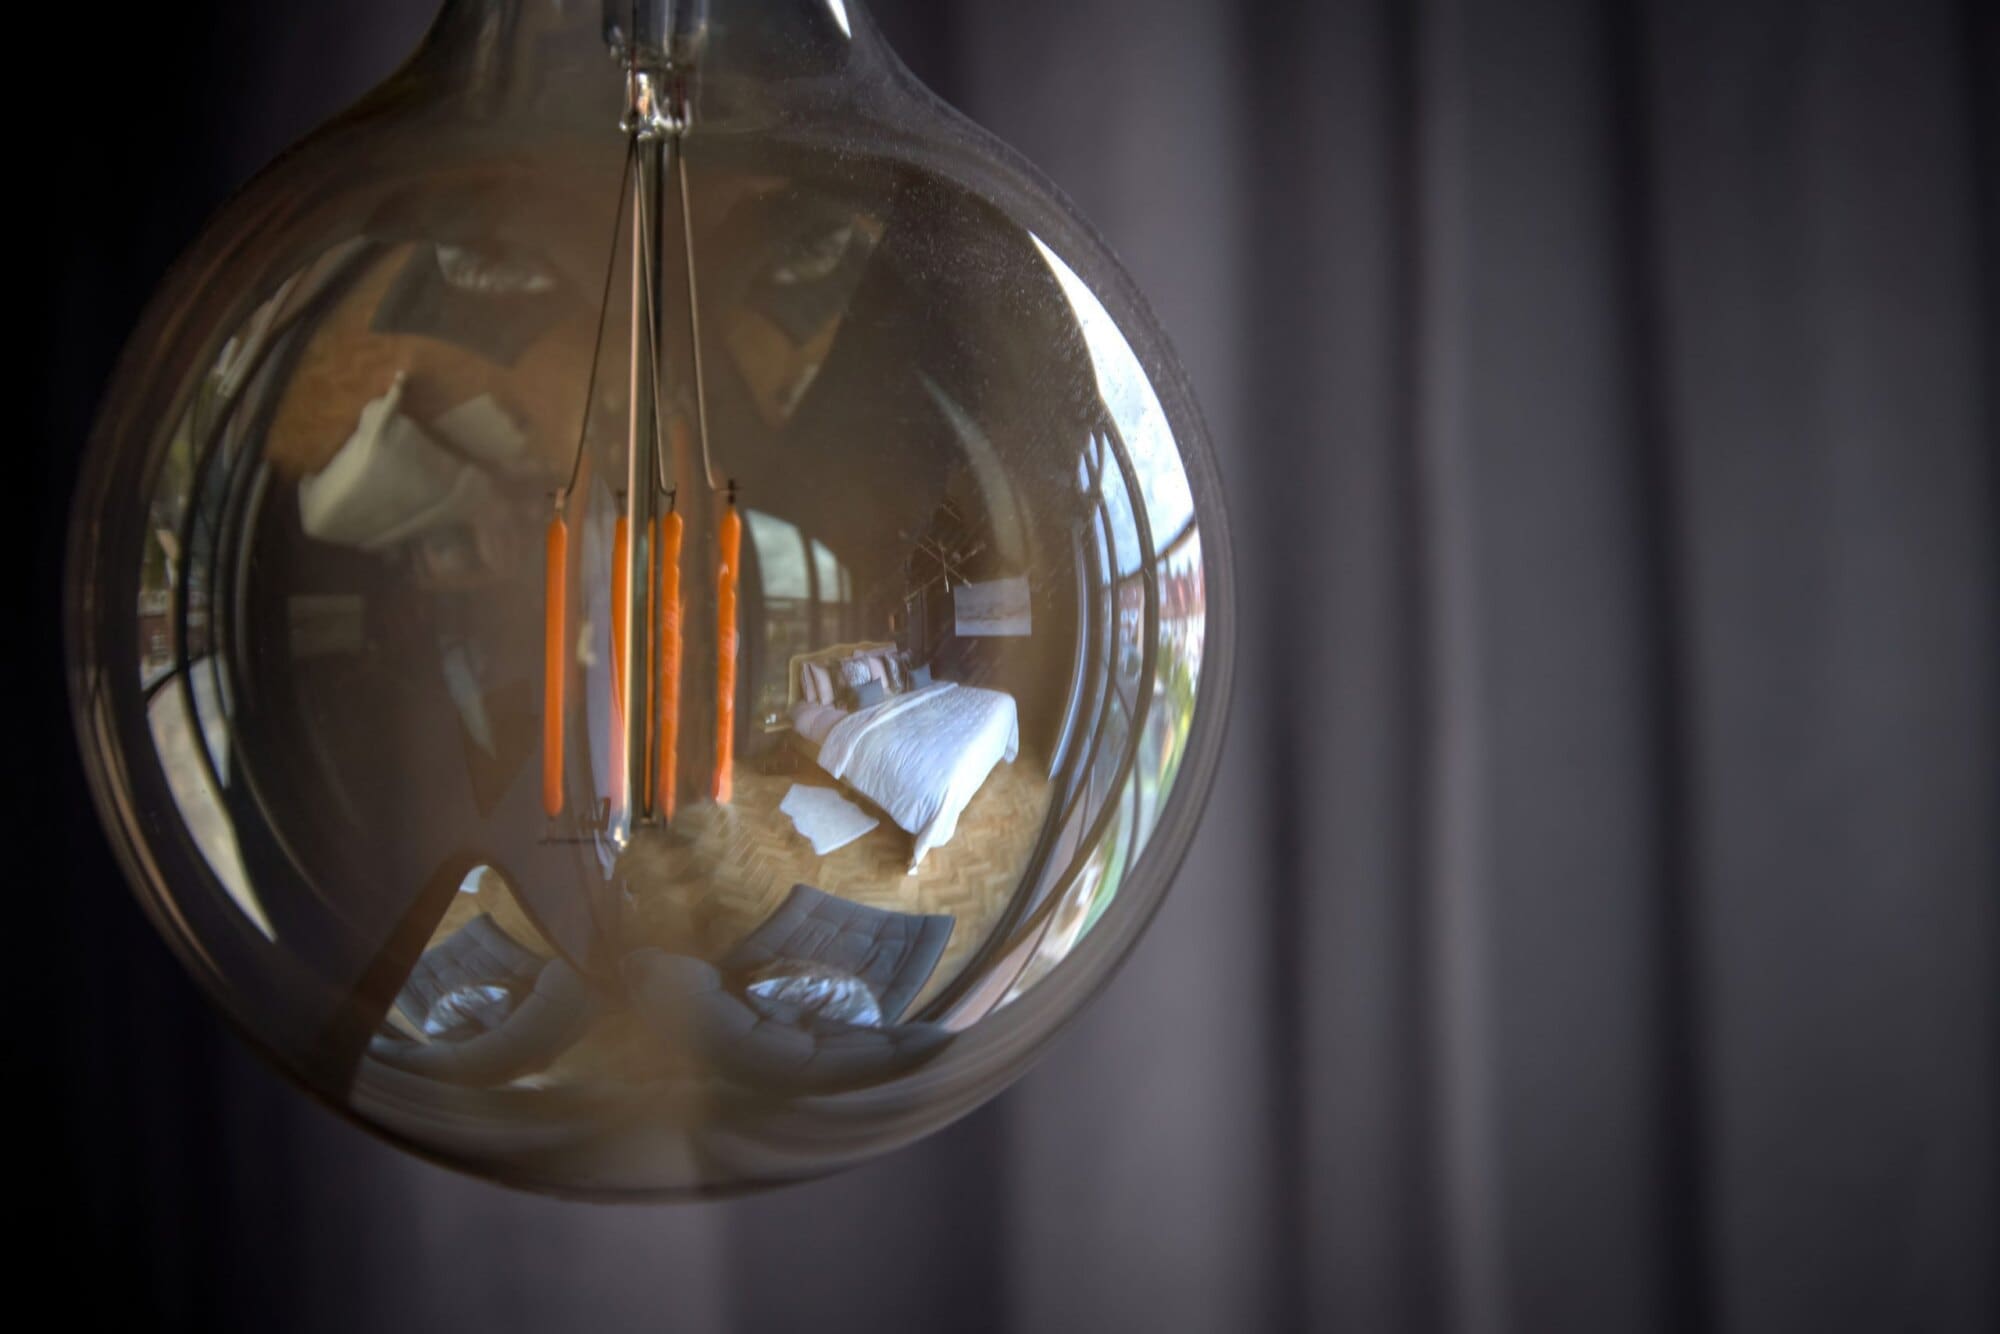 filament bulb in surface reflection shows high-end loft conversion